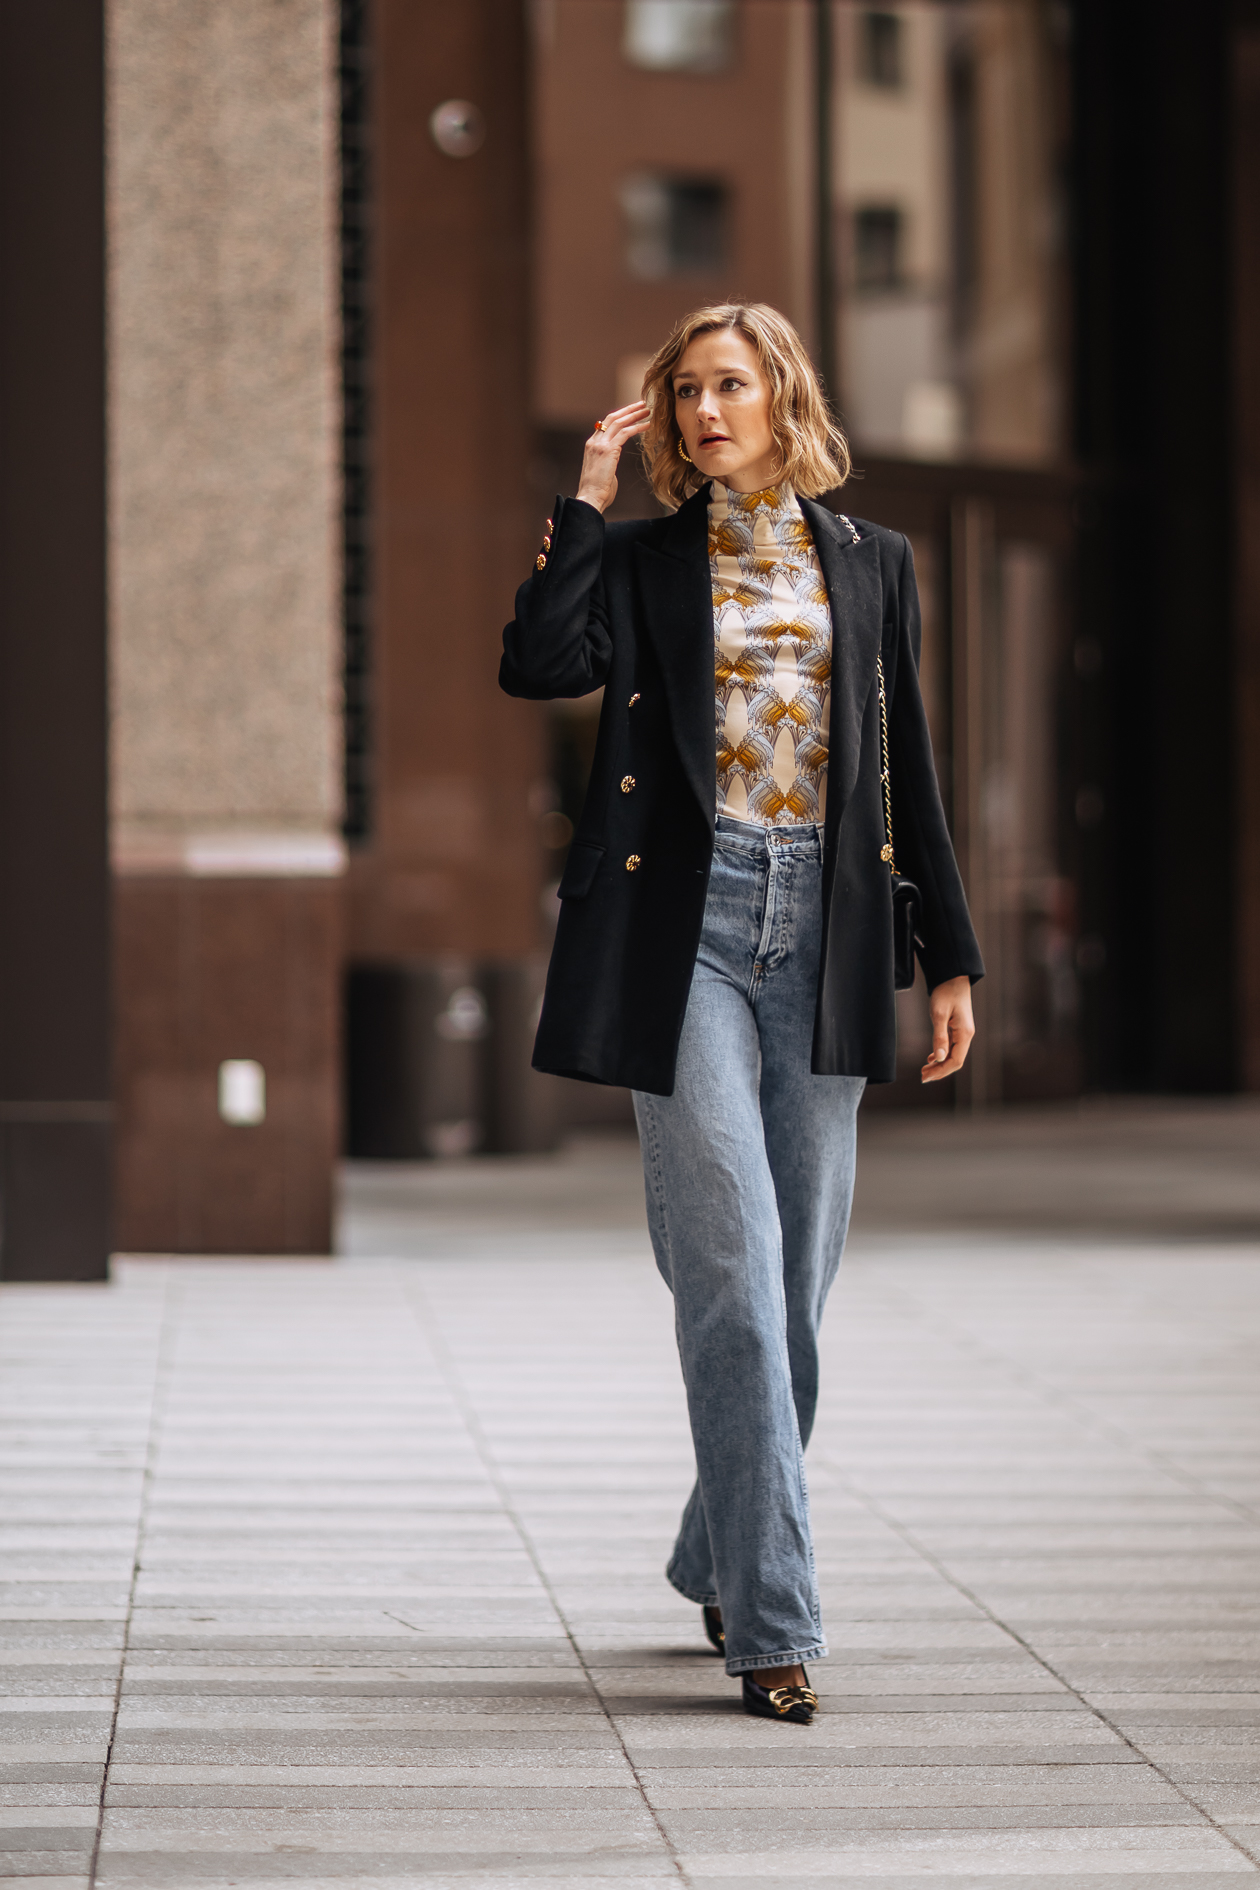 unconventional date night outfit turtleneck & jeans